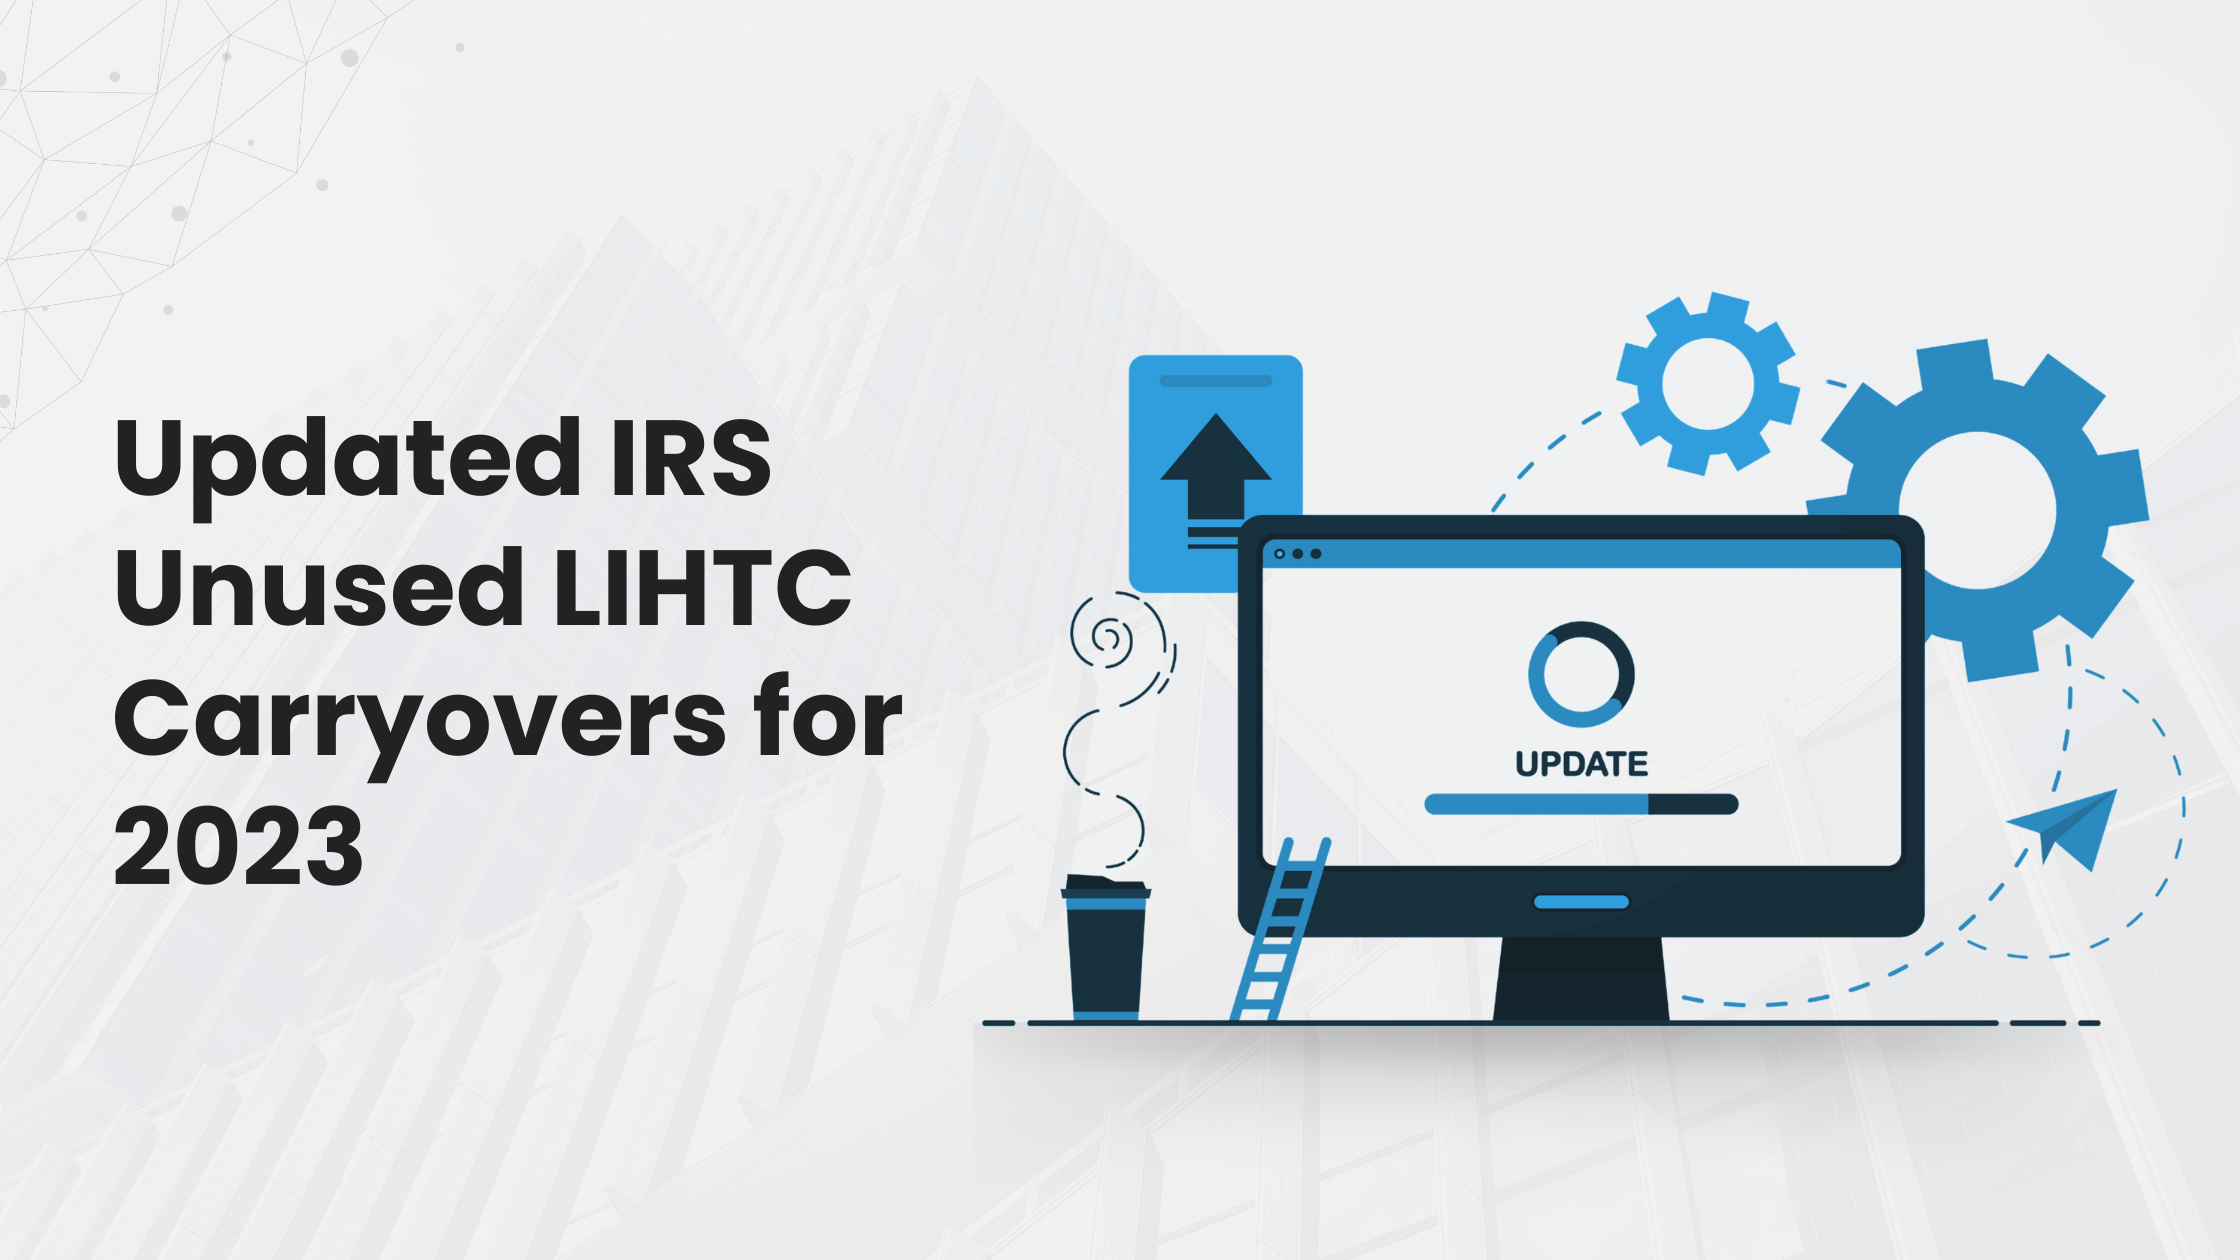 Updated IRS Unused LIHTC Carryovers for 2023